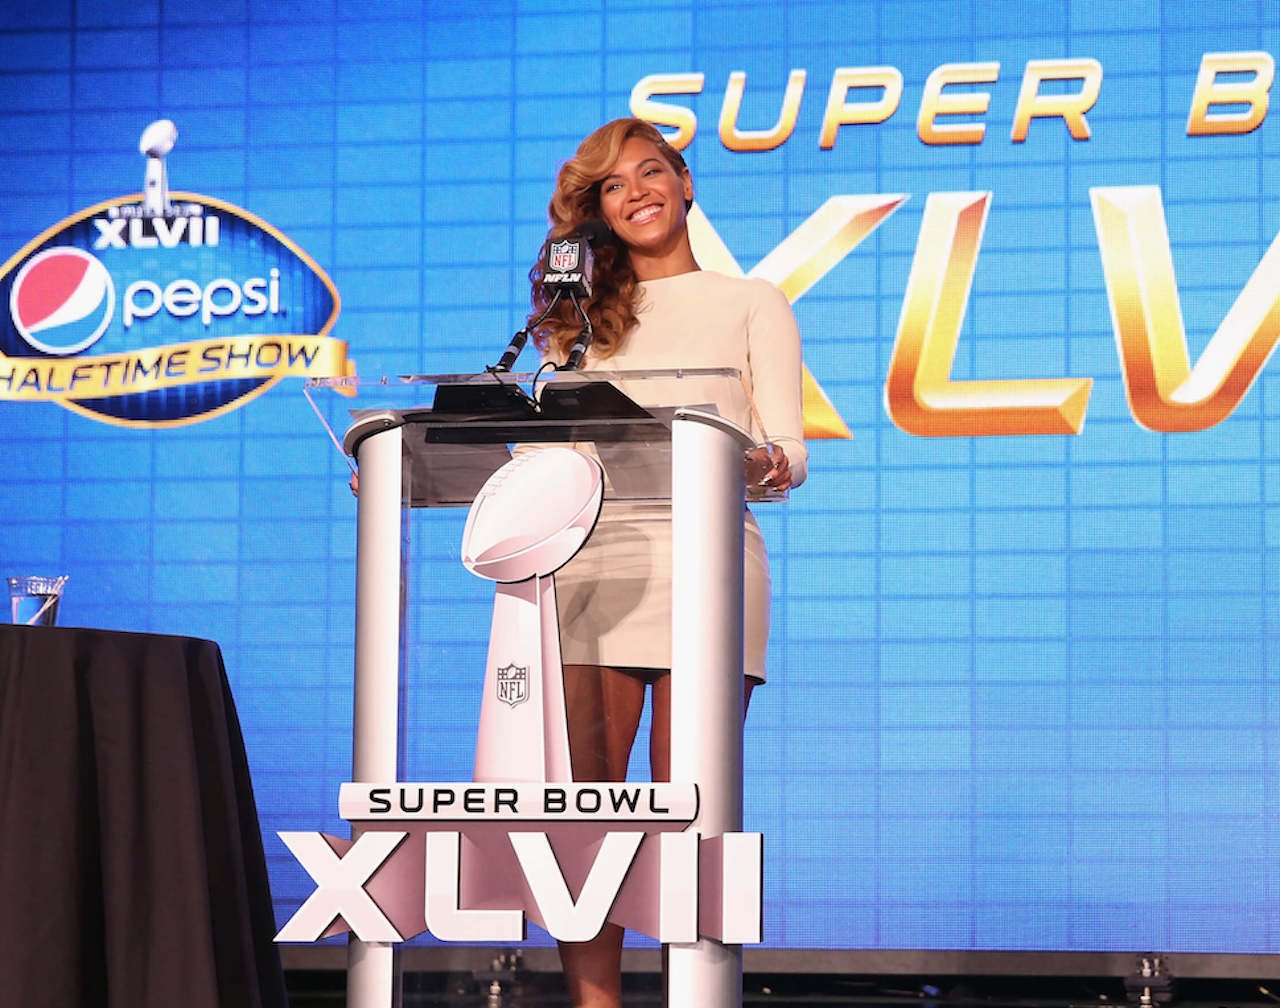 Beyoncé speaks at the Pepsi Super Bowl XLVII Halftime Show Press Conference at the Ernest N. Morial Convention Center on January 31, 2013.